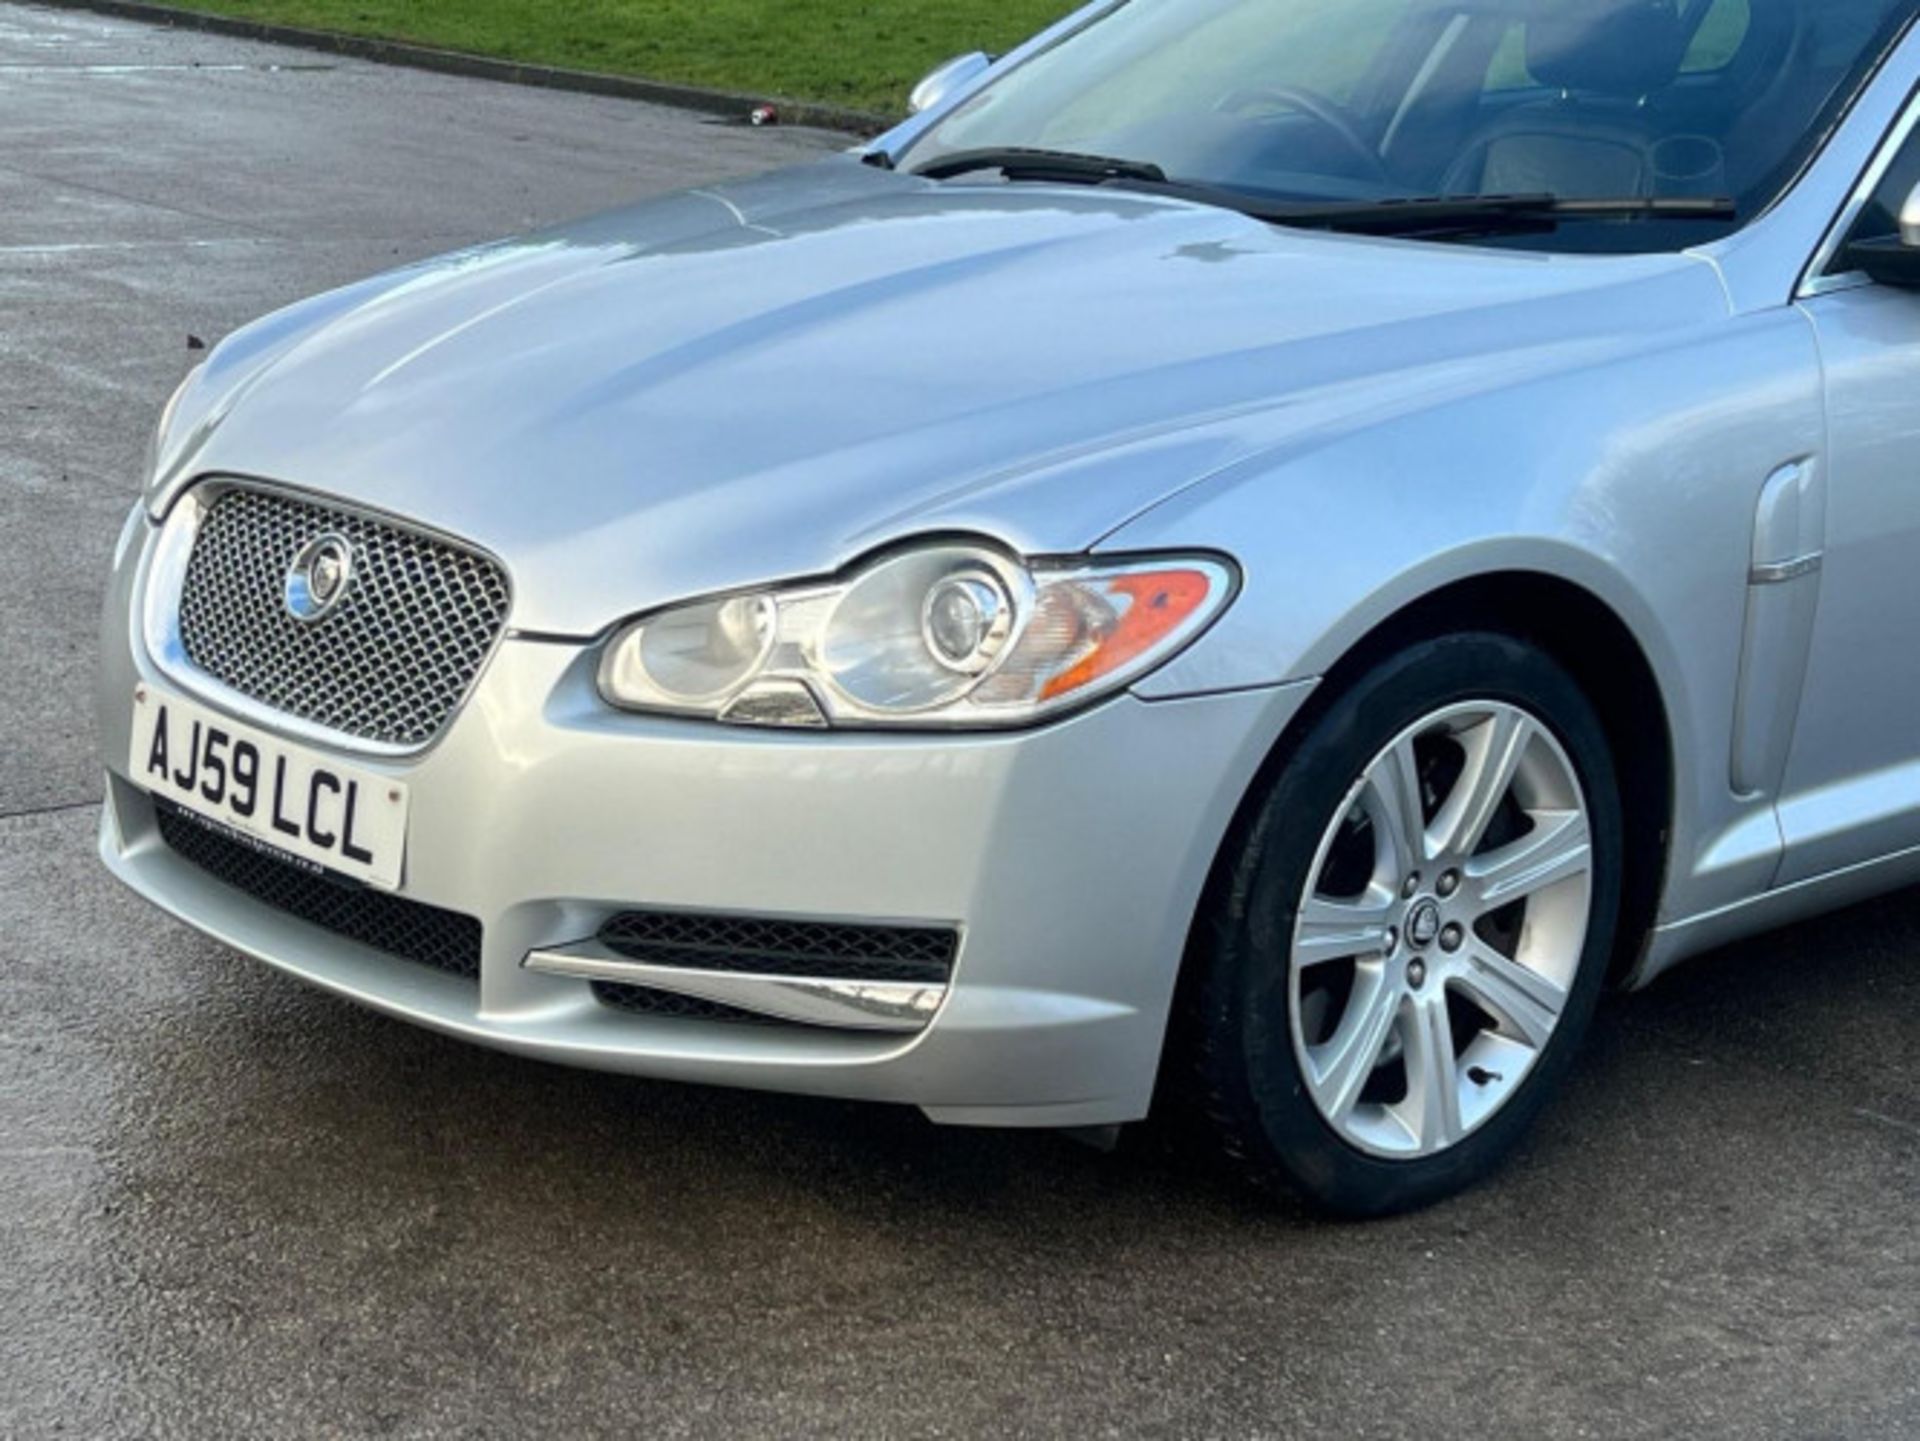 LUXURIOUS JAGUAR XF 3.0D V6 LUXURY 4DR AUTOMATIC SALOON >>--NO VAT ON HAMMER--<< - Image 72 of 80